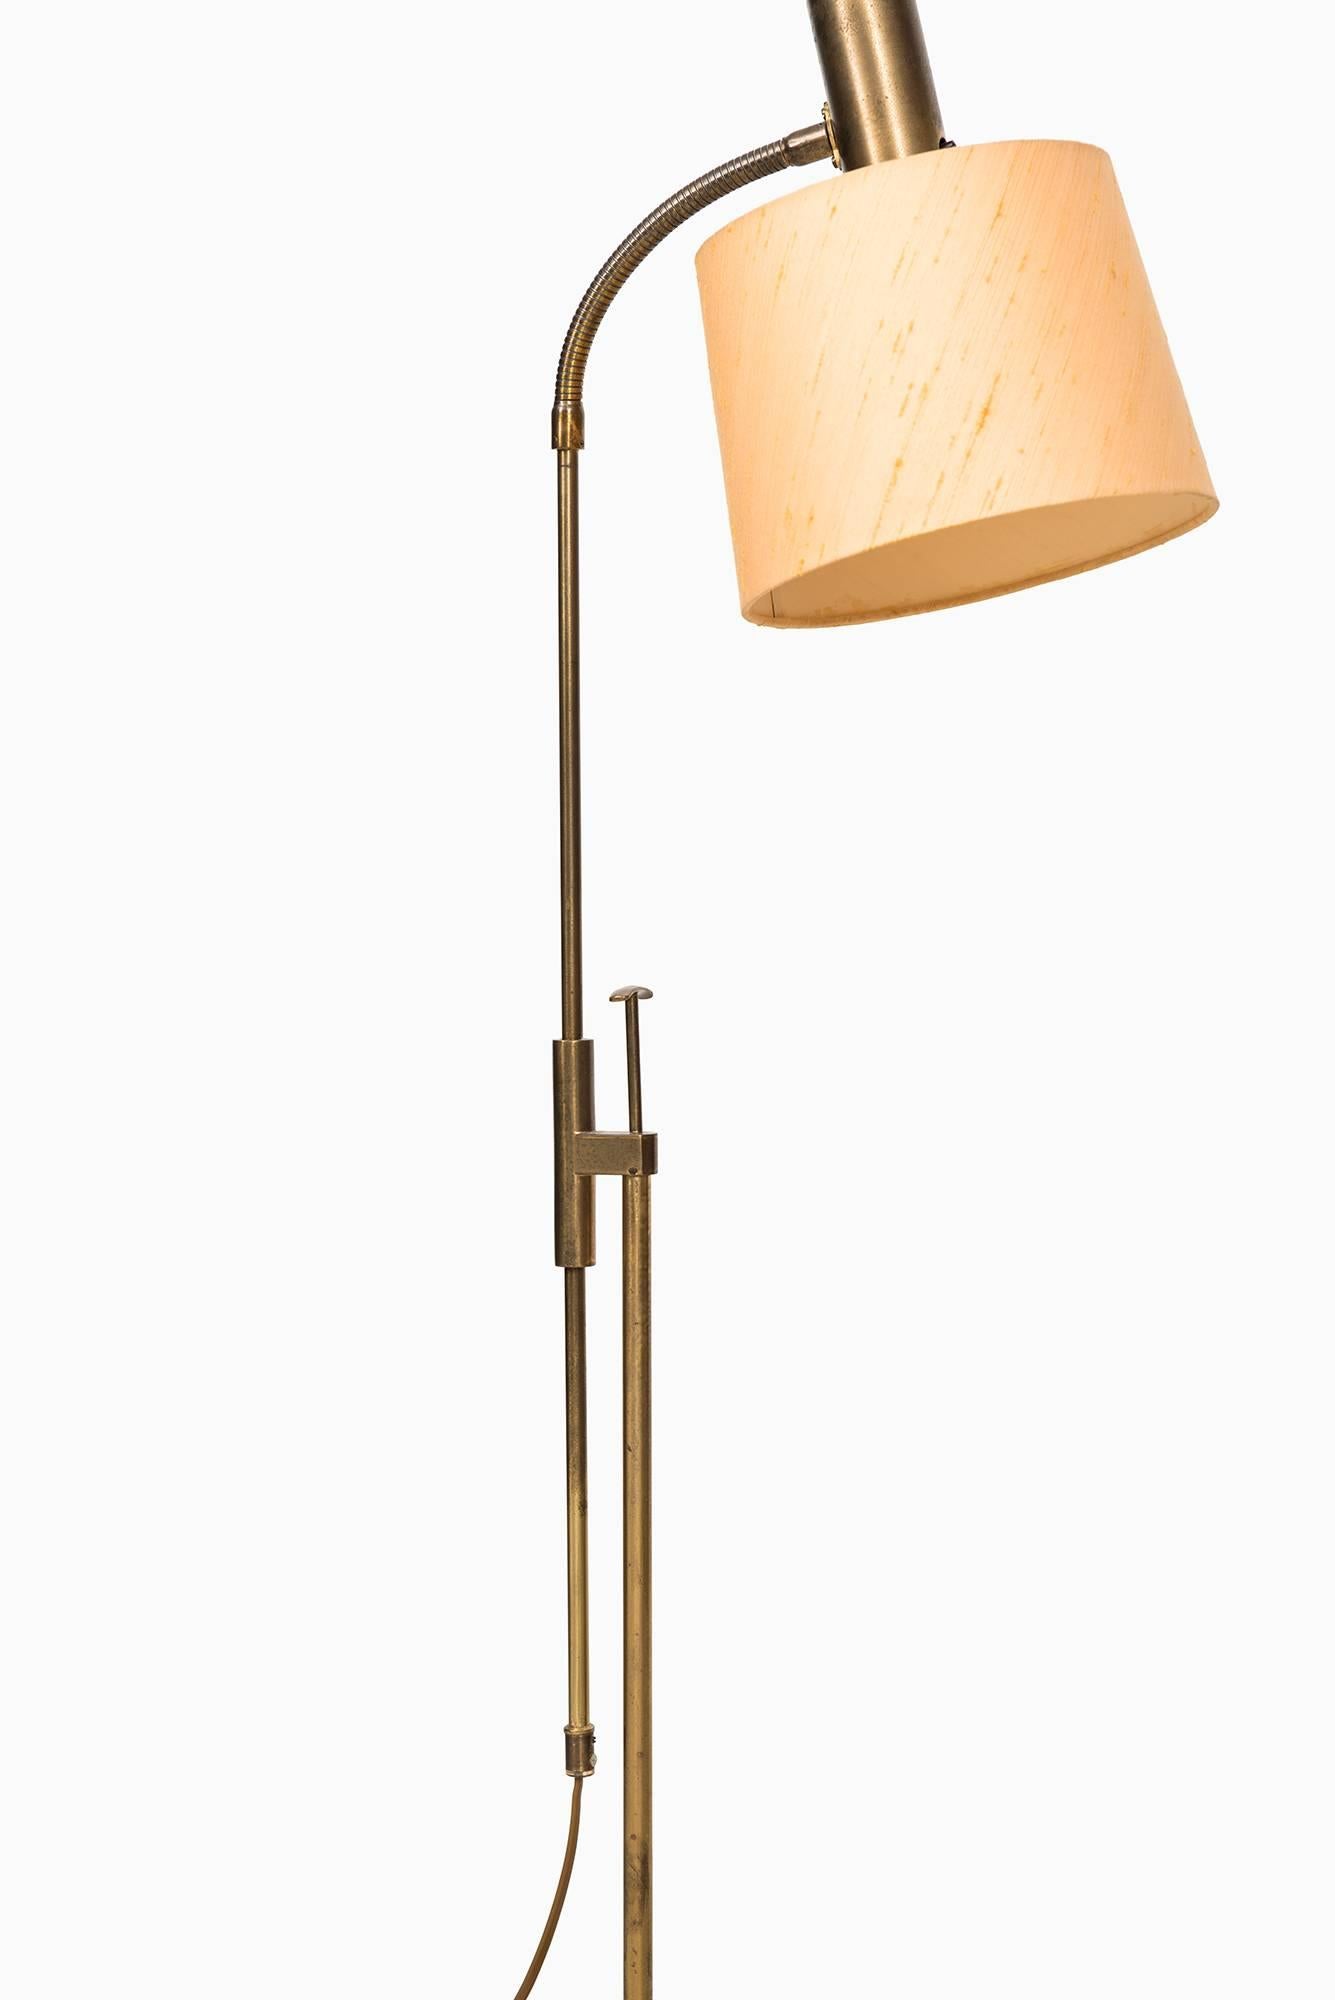 Height adjustable floor lamp. Produced by Falkenbergs Belysning in Sweden.